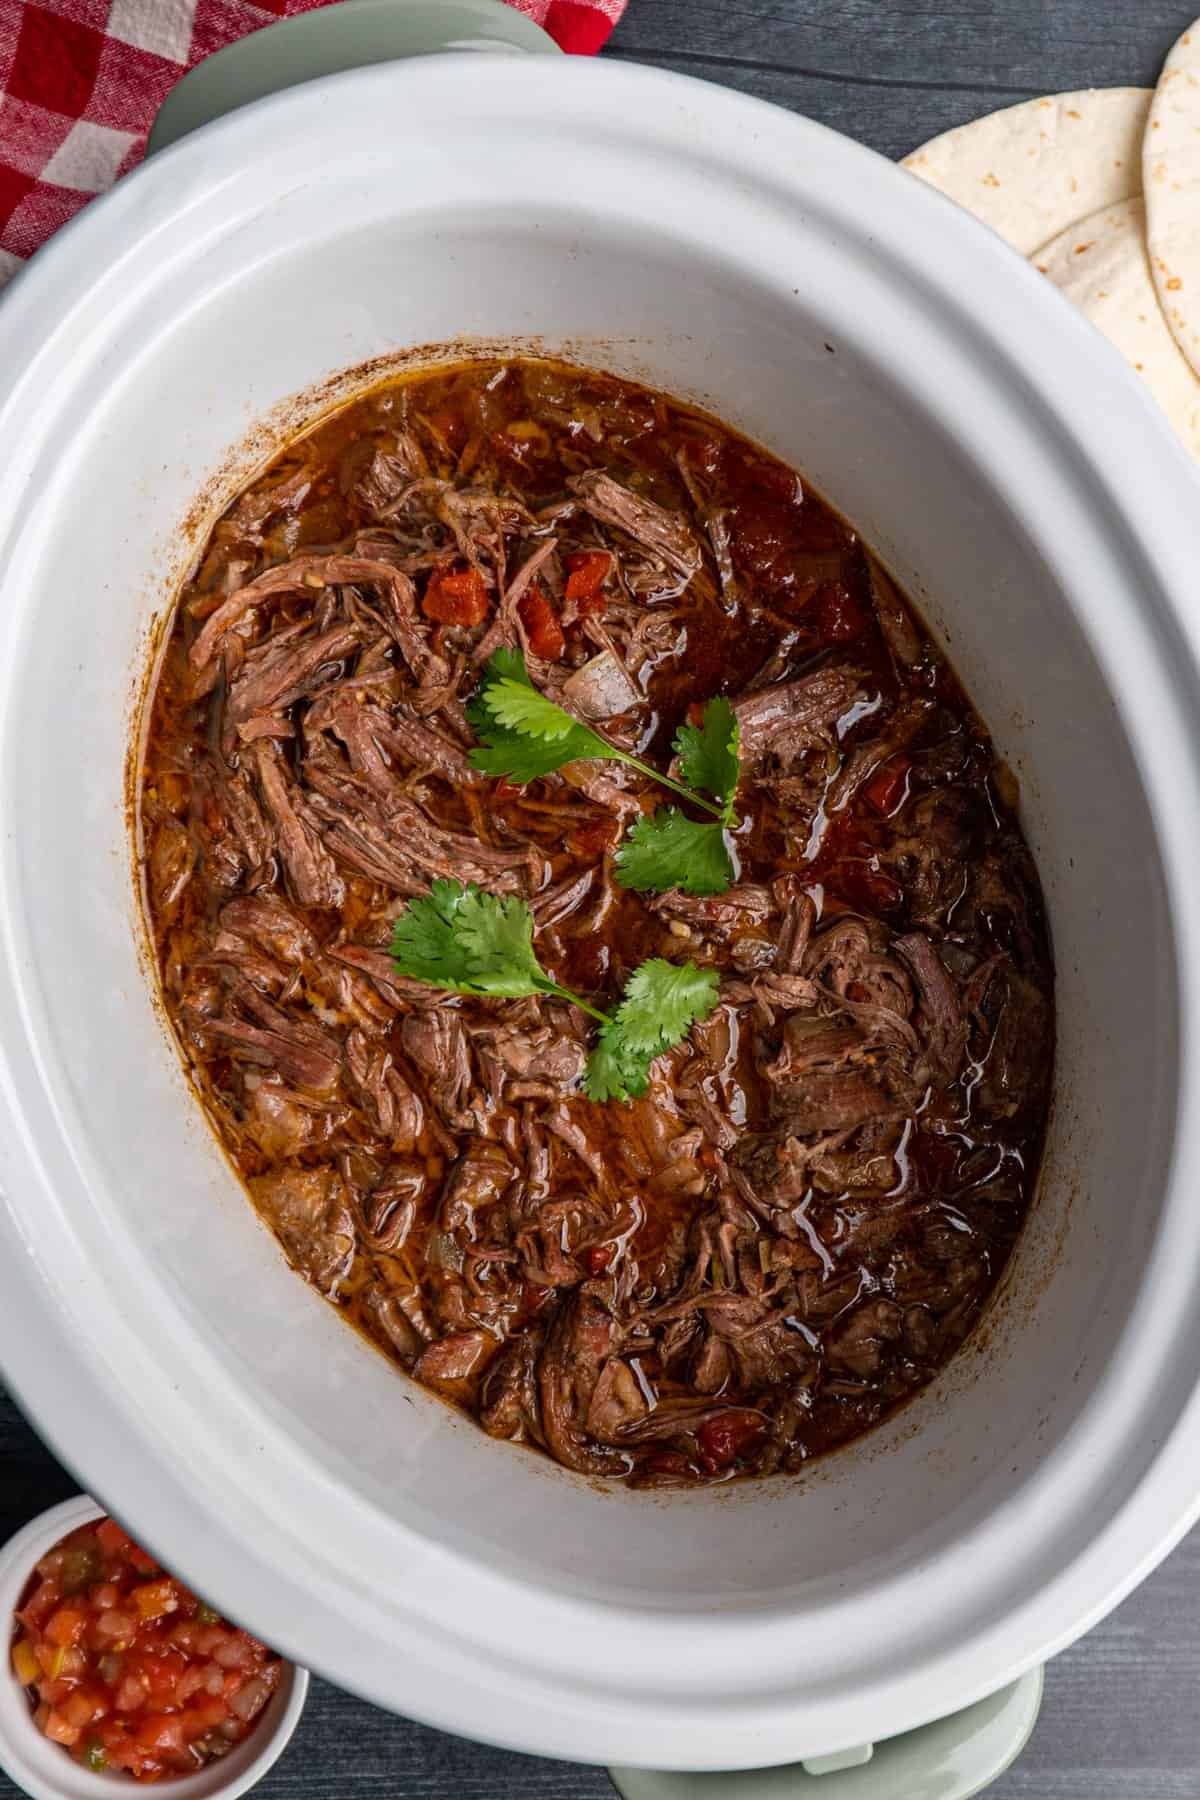 Shredded beef in a white crock pot garnished with cilantro.